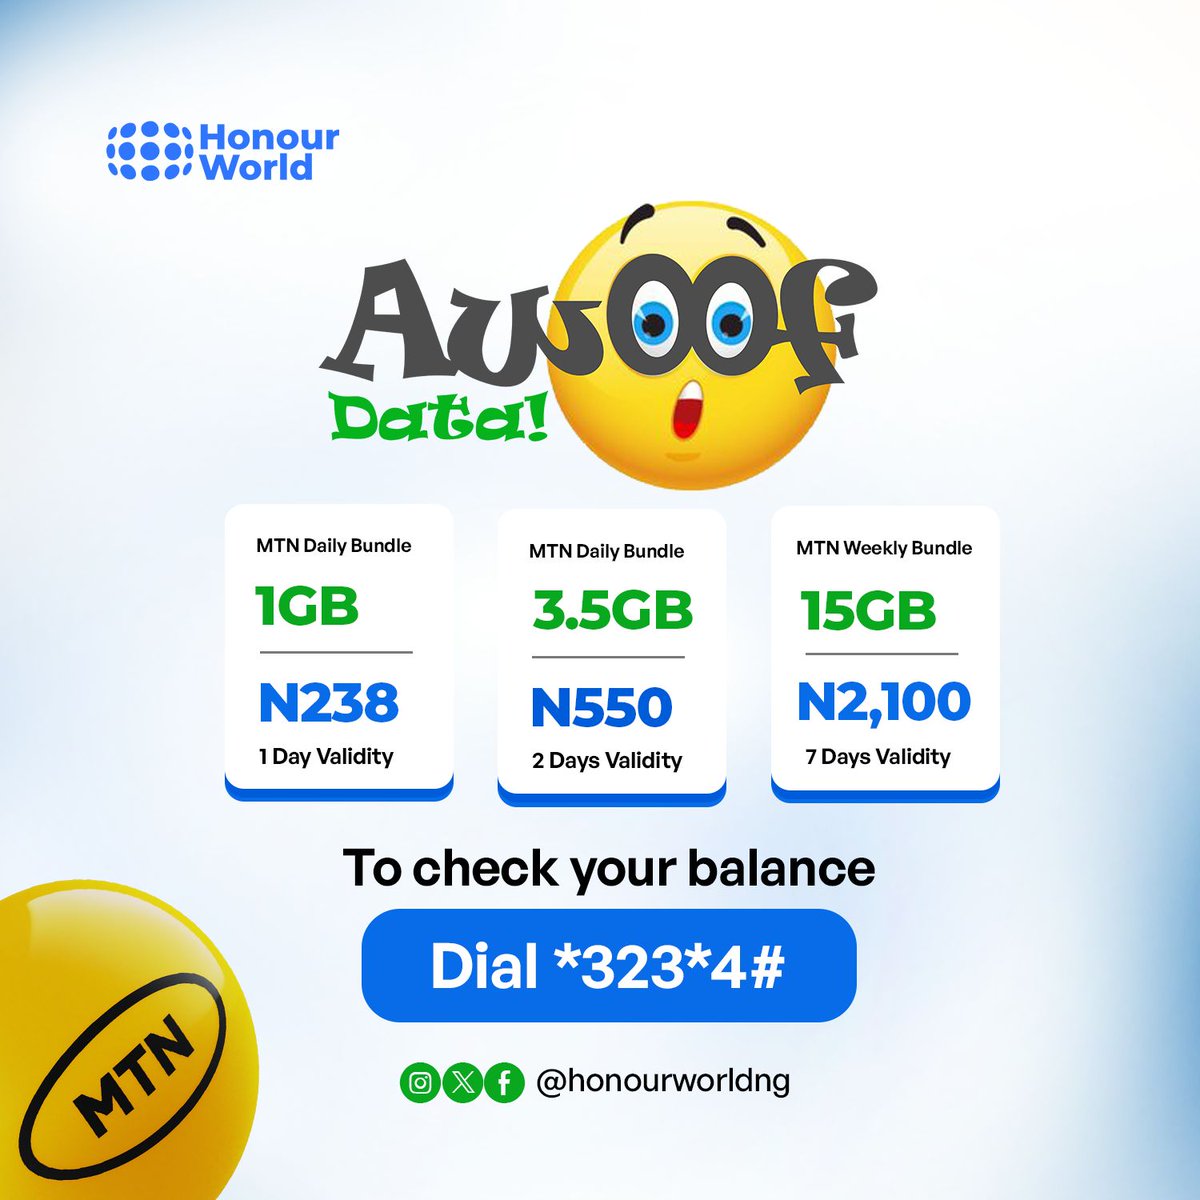 Yay! Honour World Awoof Data is here! Enjoy affordable data at unbelievable rates. If you haven't downloaded our app yet, do it now and experience data rates that fit your needs and budget. 
#DataDeals #DownloadNow #DontMissOut  #HonourWorld #WhatsApp Babcock  #cryptocurrency